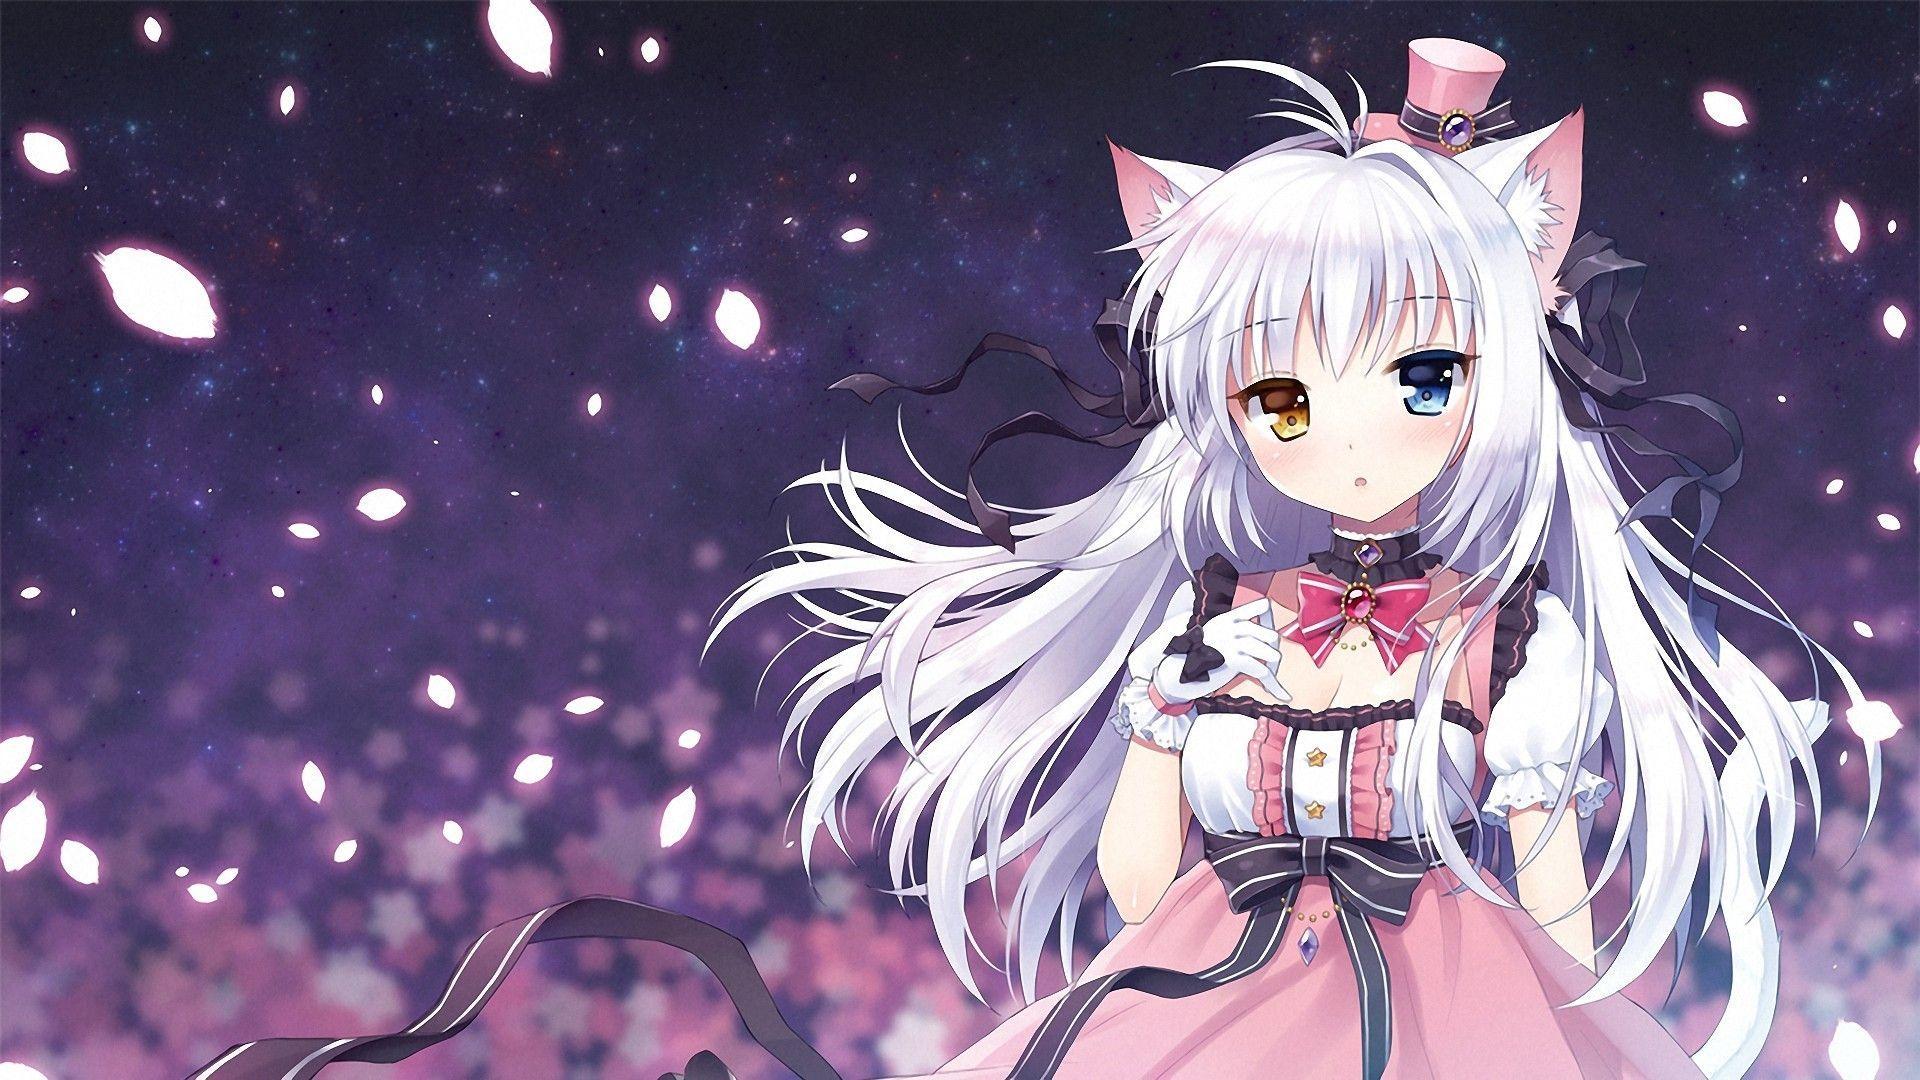 1920 X 1080 Anime Cat Girl Wallpapers - Top Free 1920 X 1080 Anime Cat